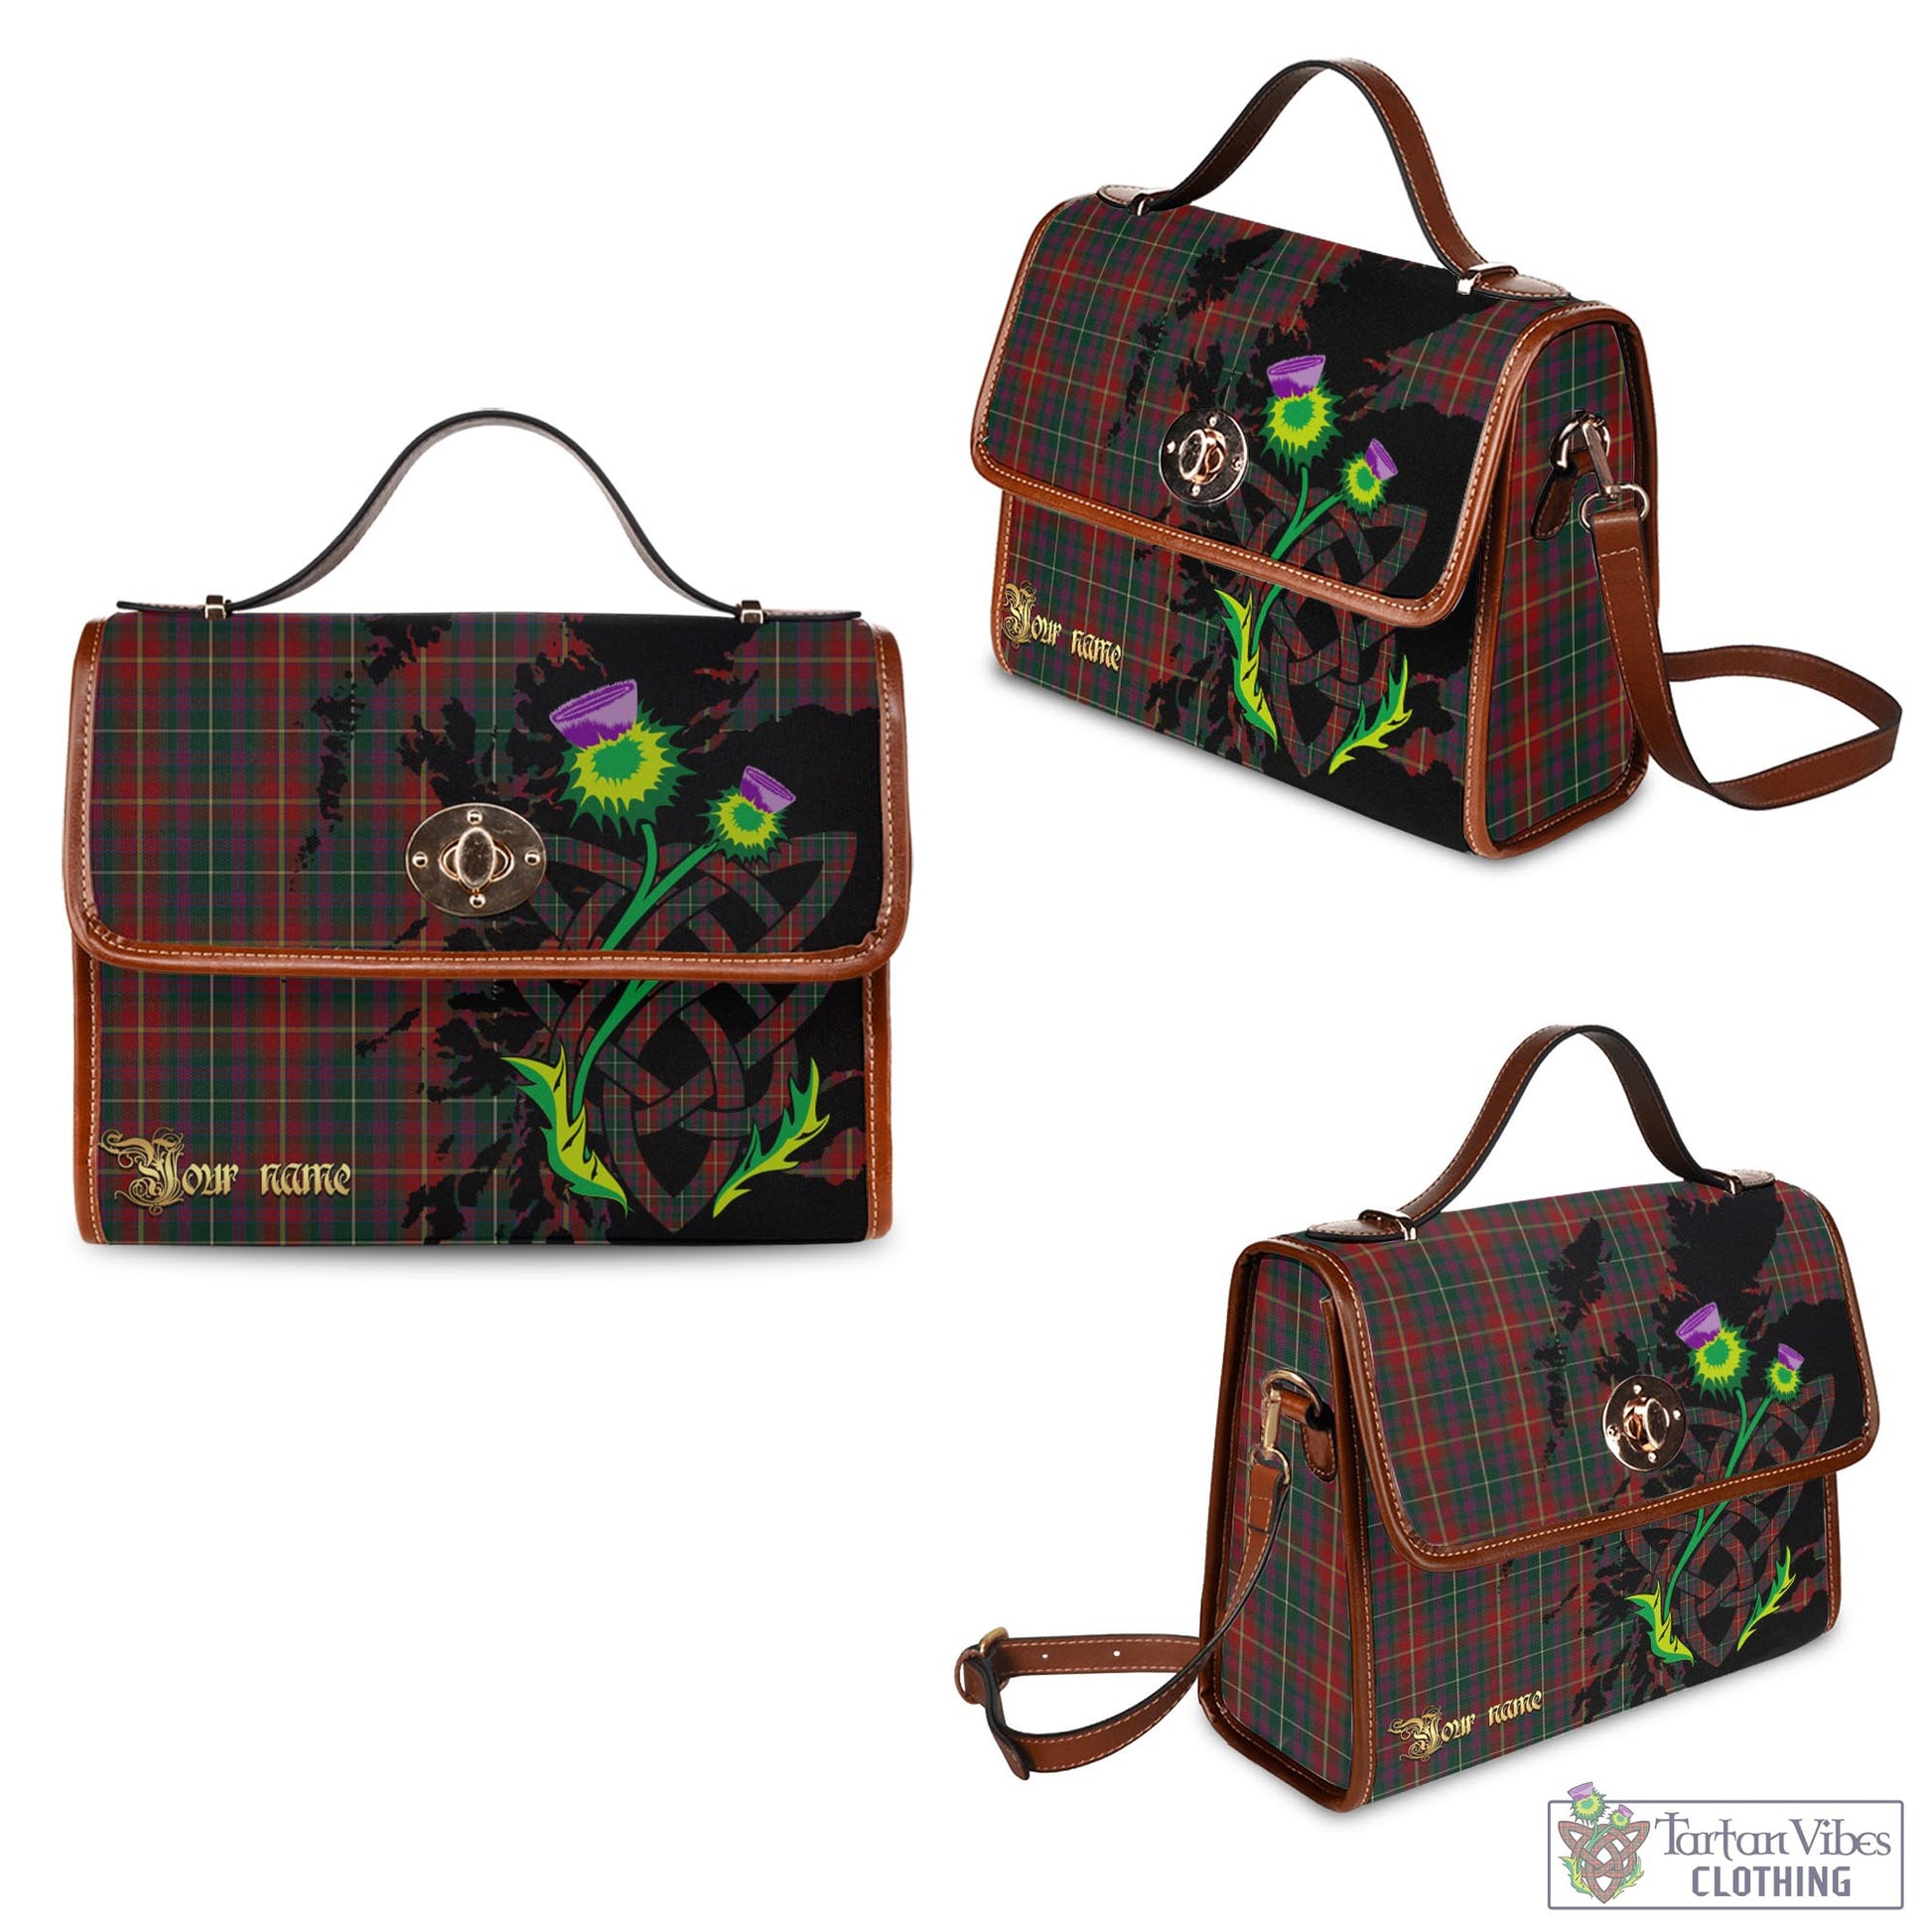 Tartan Vibes Clothing Meath County Ireland Tartan Waterproof Canvas Bag with Scotland Map and Thistle Celtic Accents